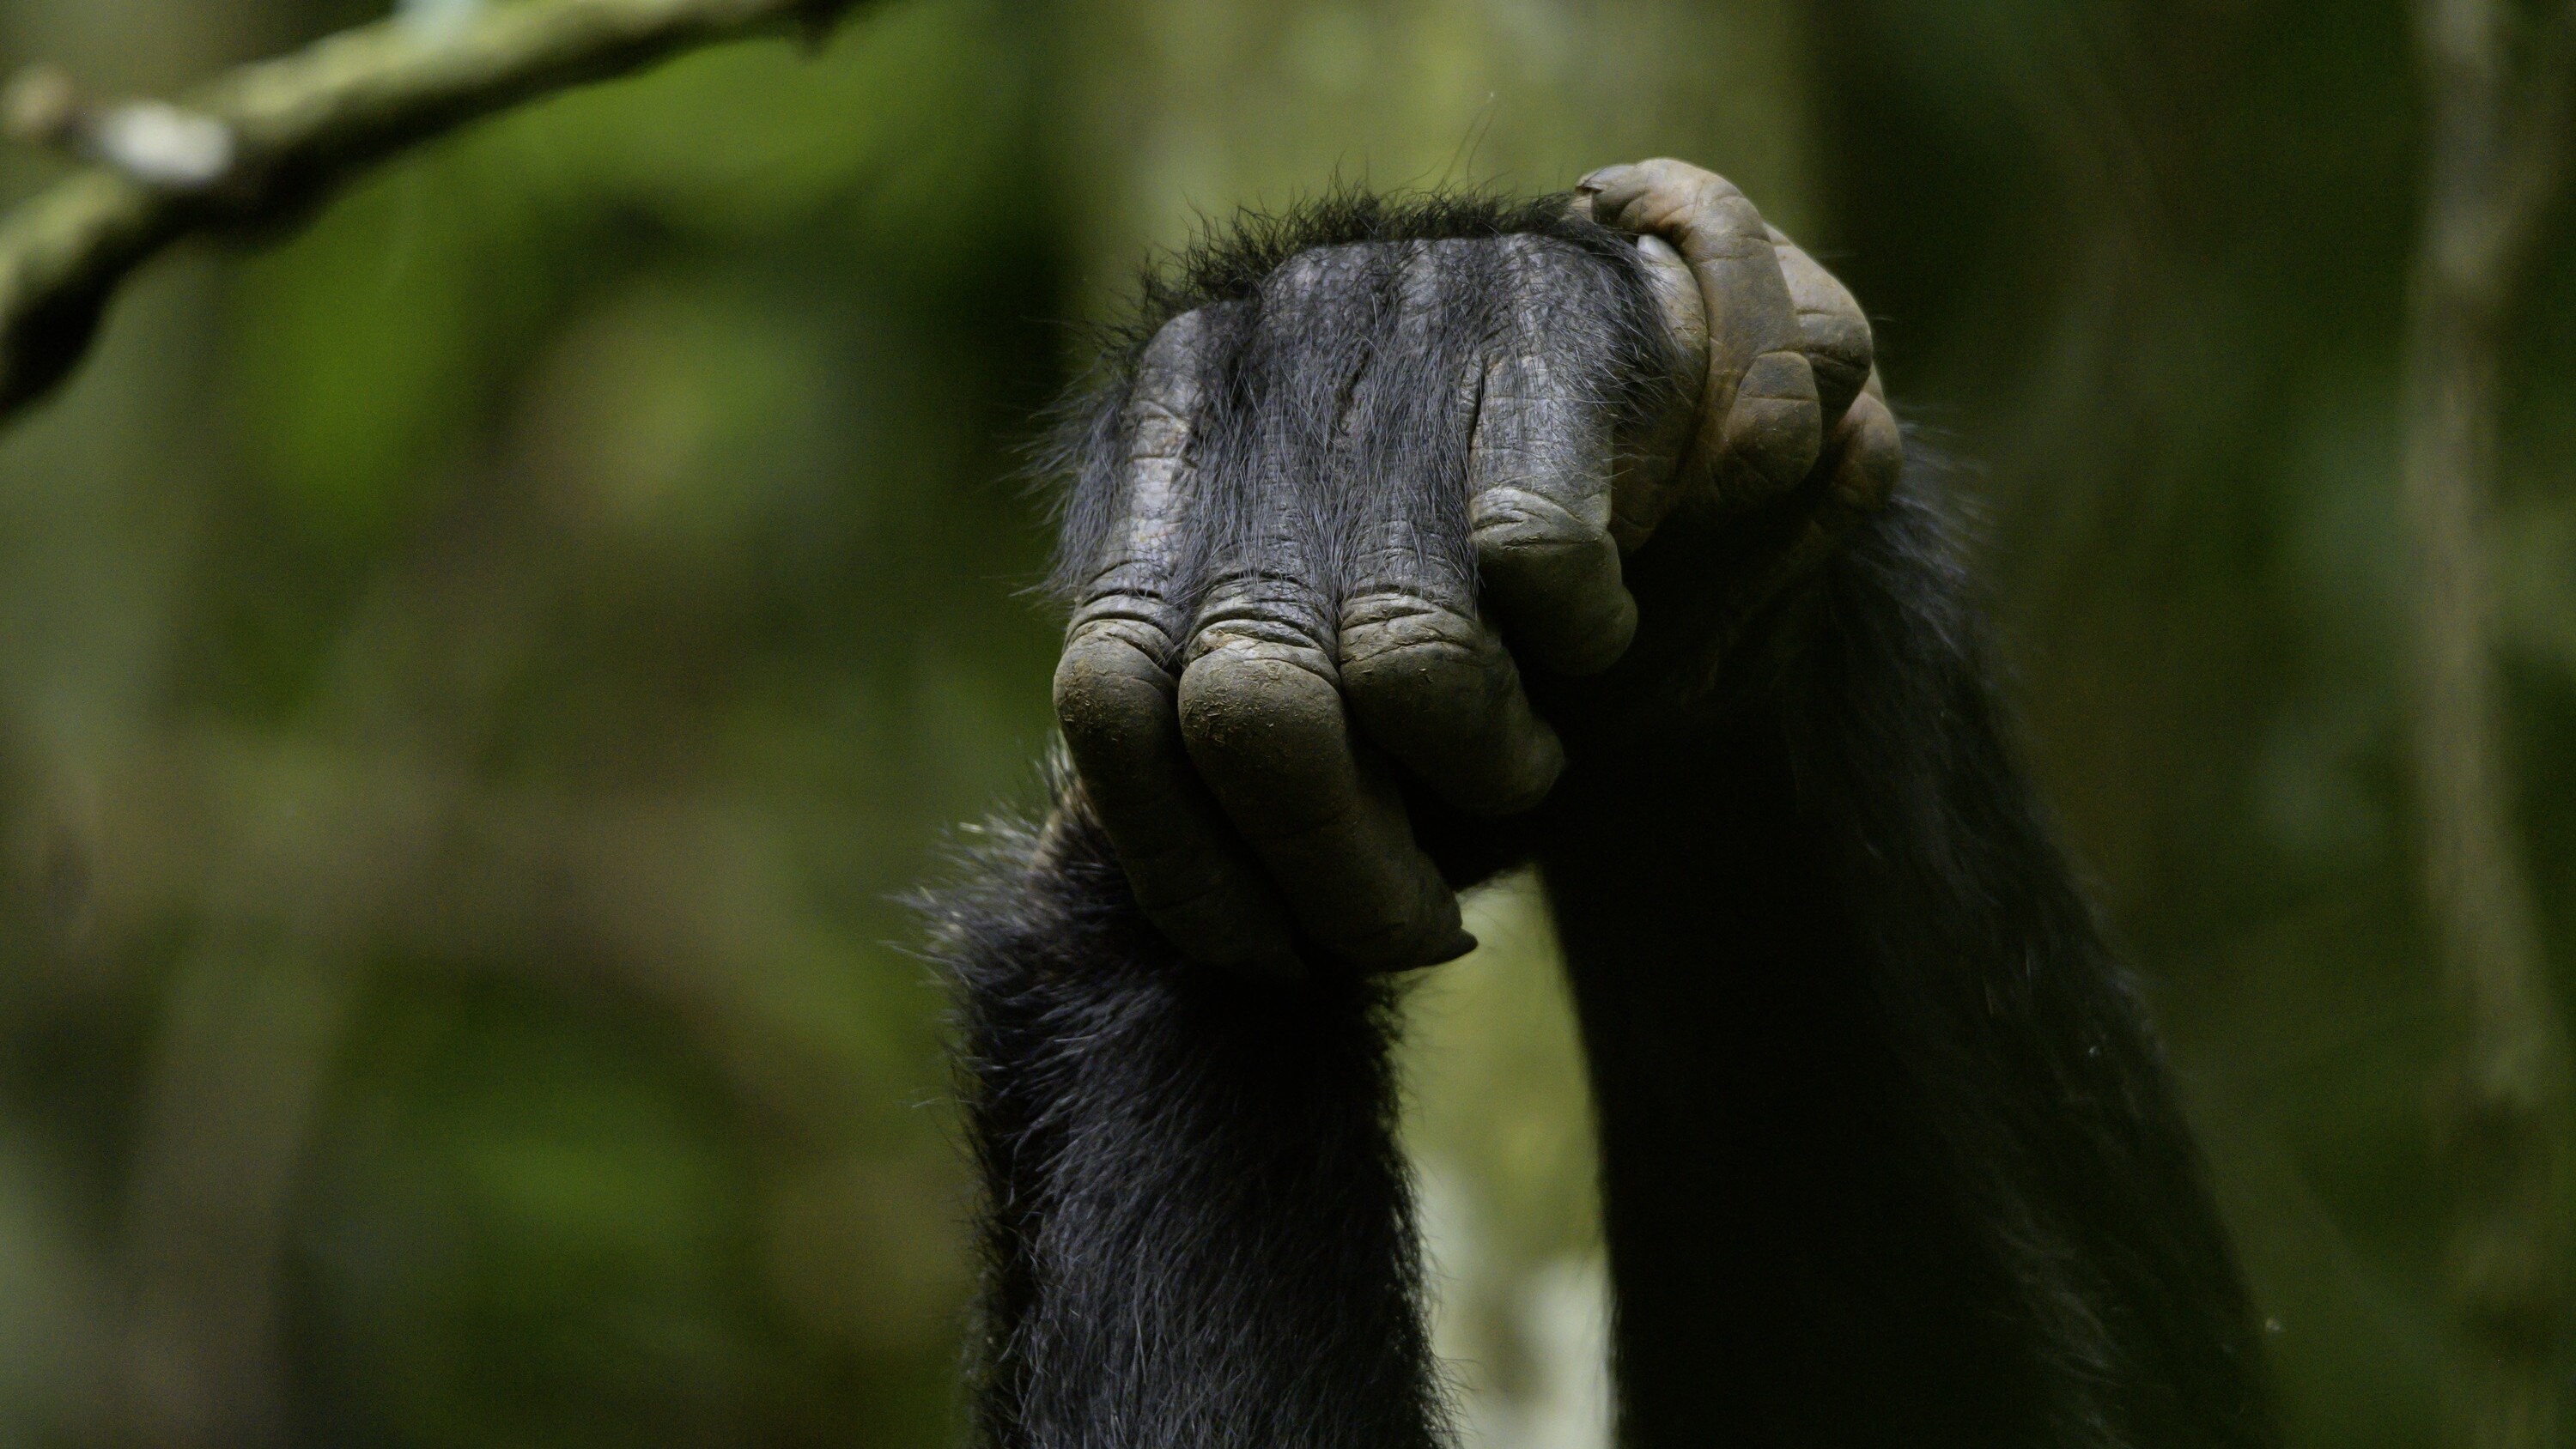 Chimps clasp hands while grooming. (National Geographic for Disney+/Max Kolbl)